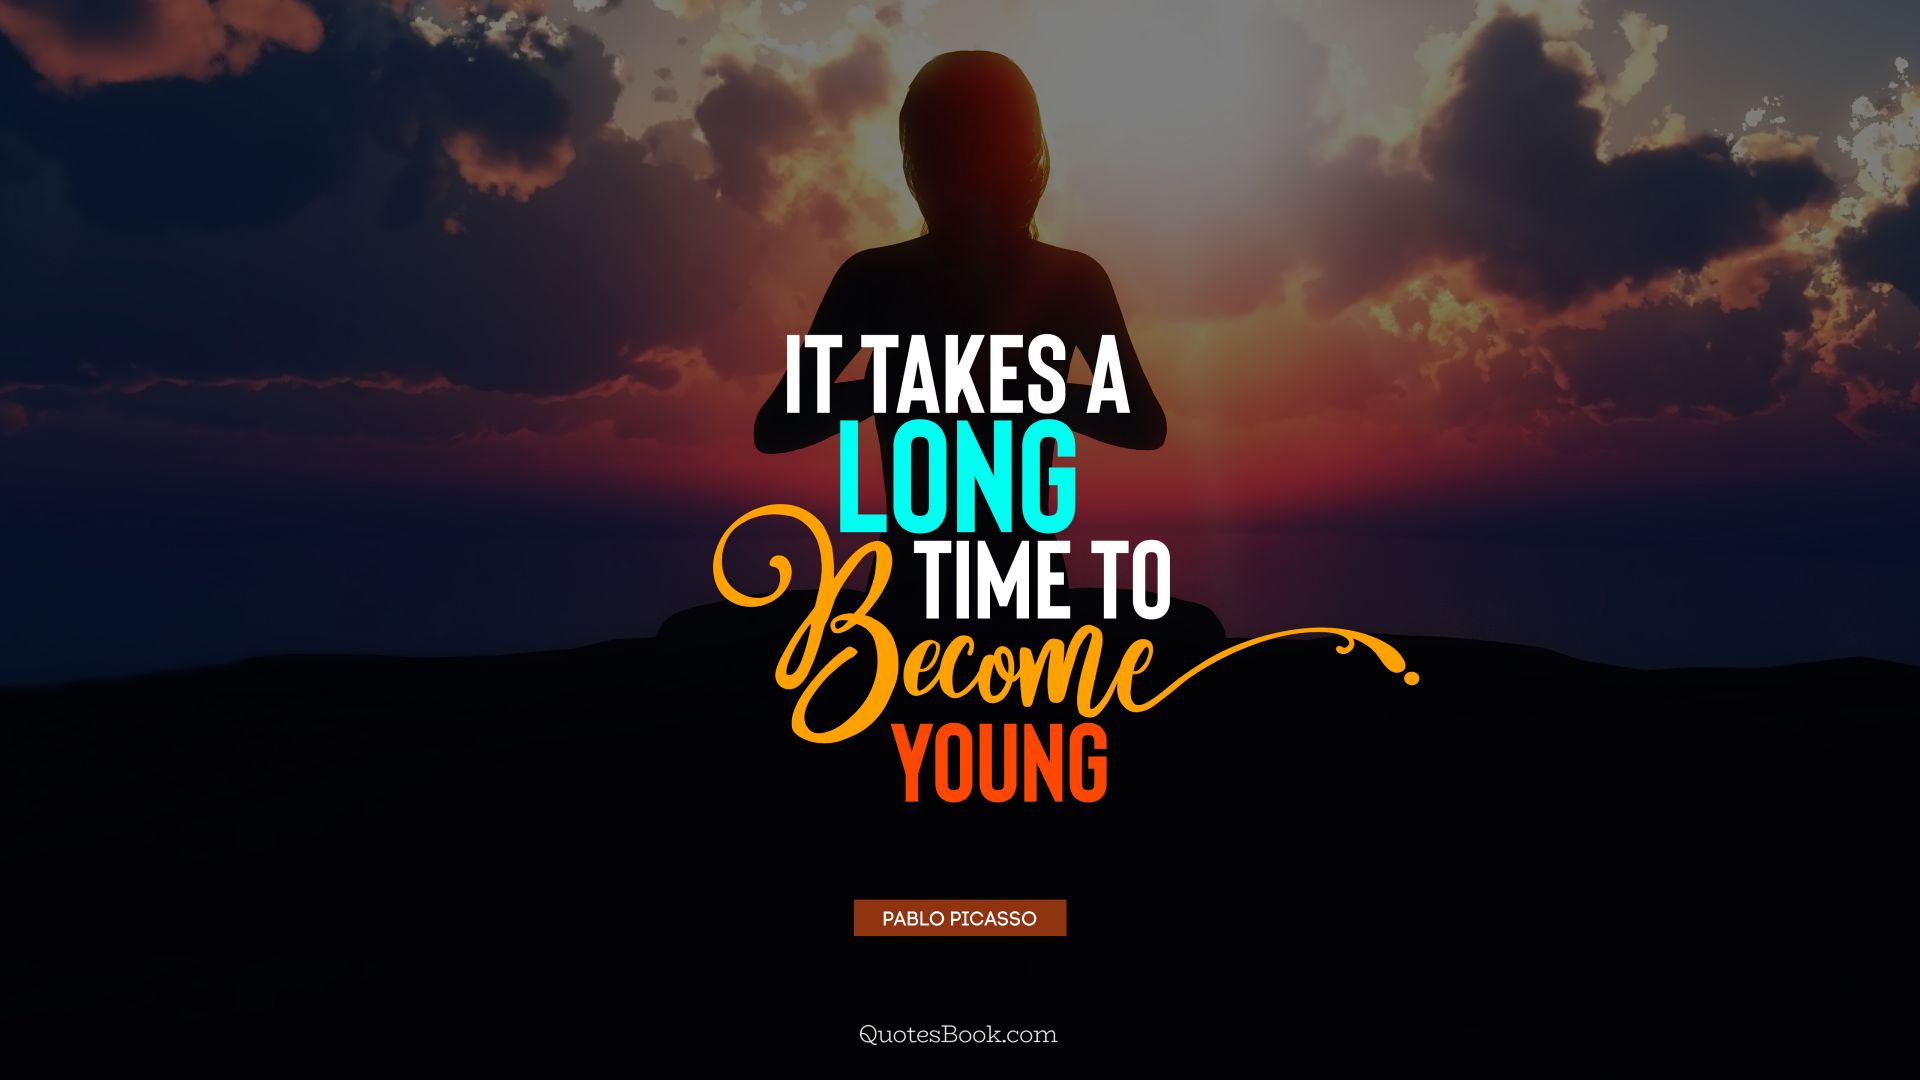 It takes a long time to become young. - Quote by Pablo Picasso